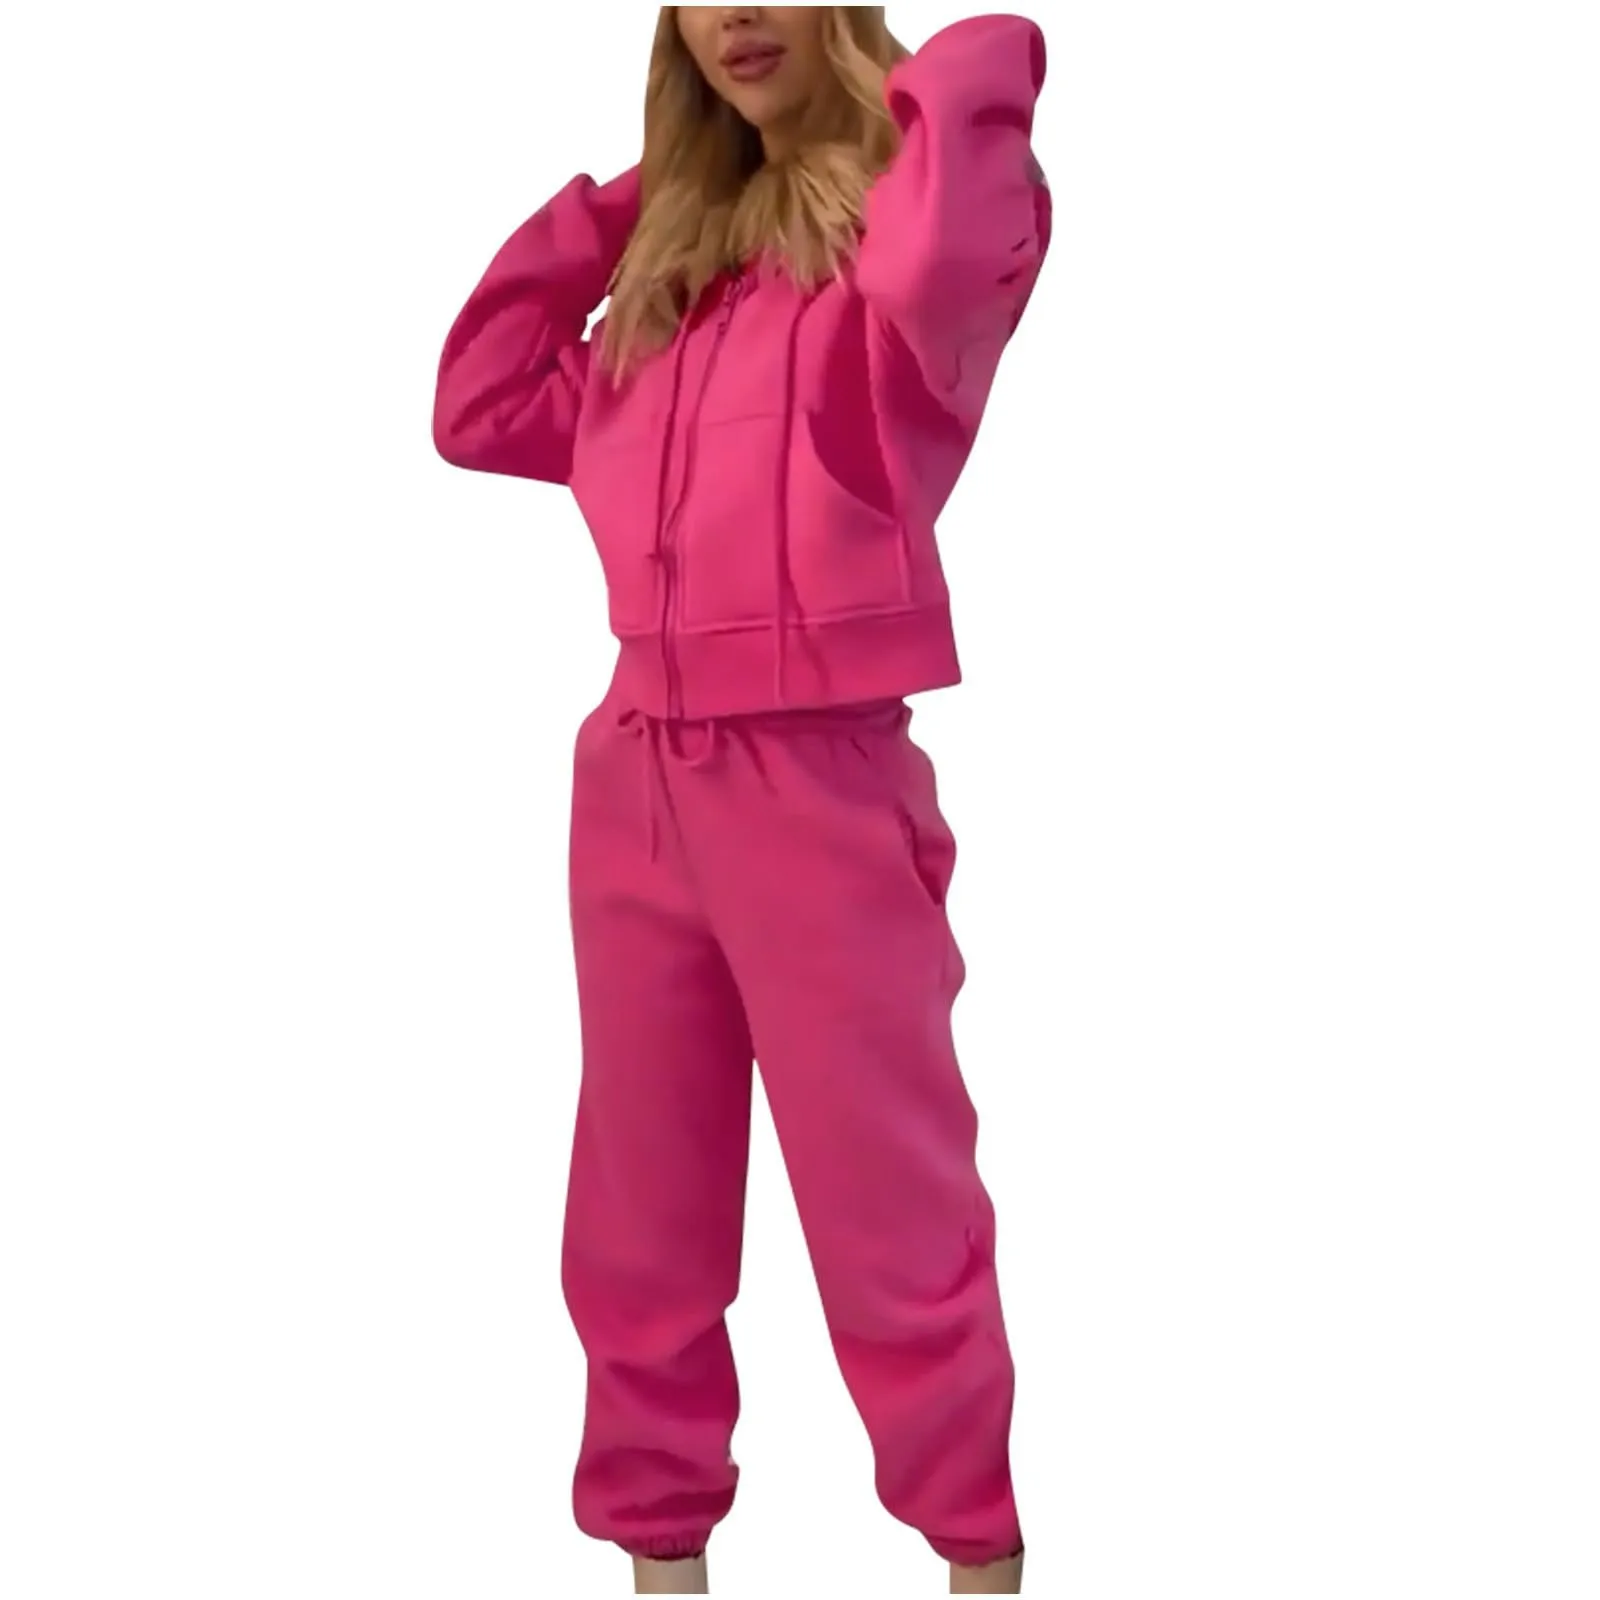 

Women's Two Piece Outfits Fall Sweatsuit Hooded Sweatshirt And Drawstring Jogger Pants Ladies Tracksuits Set Sportswear